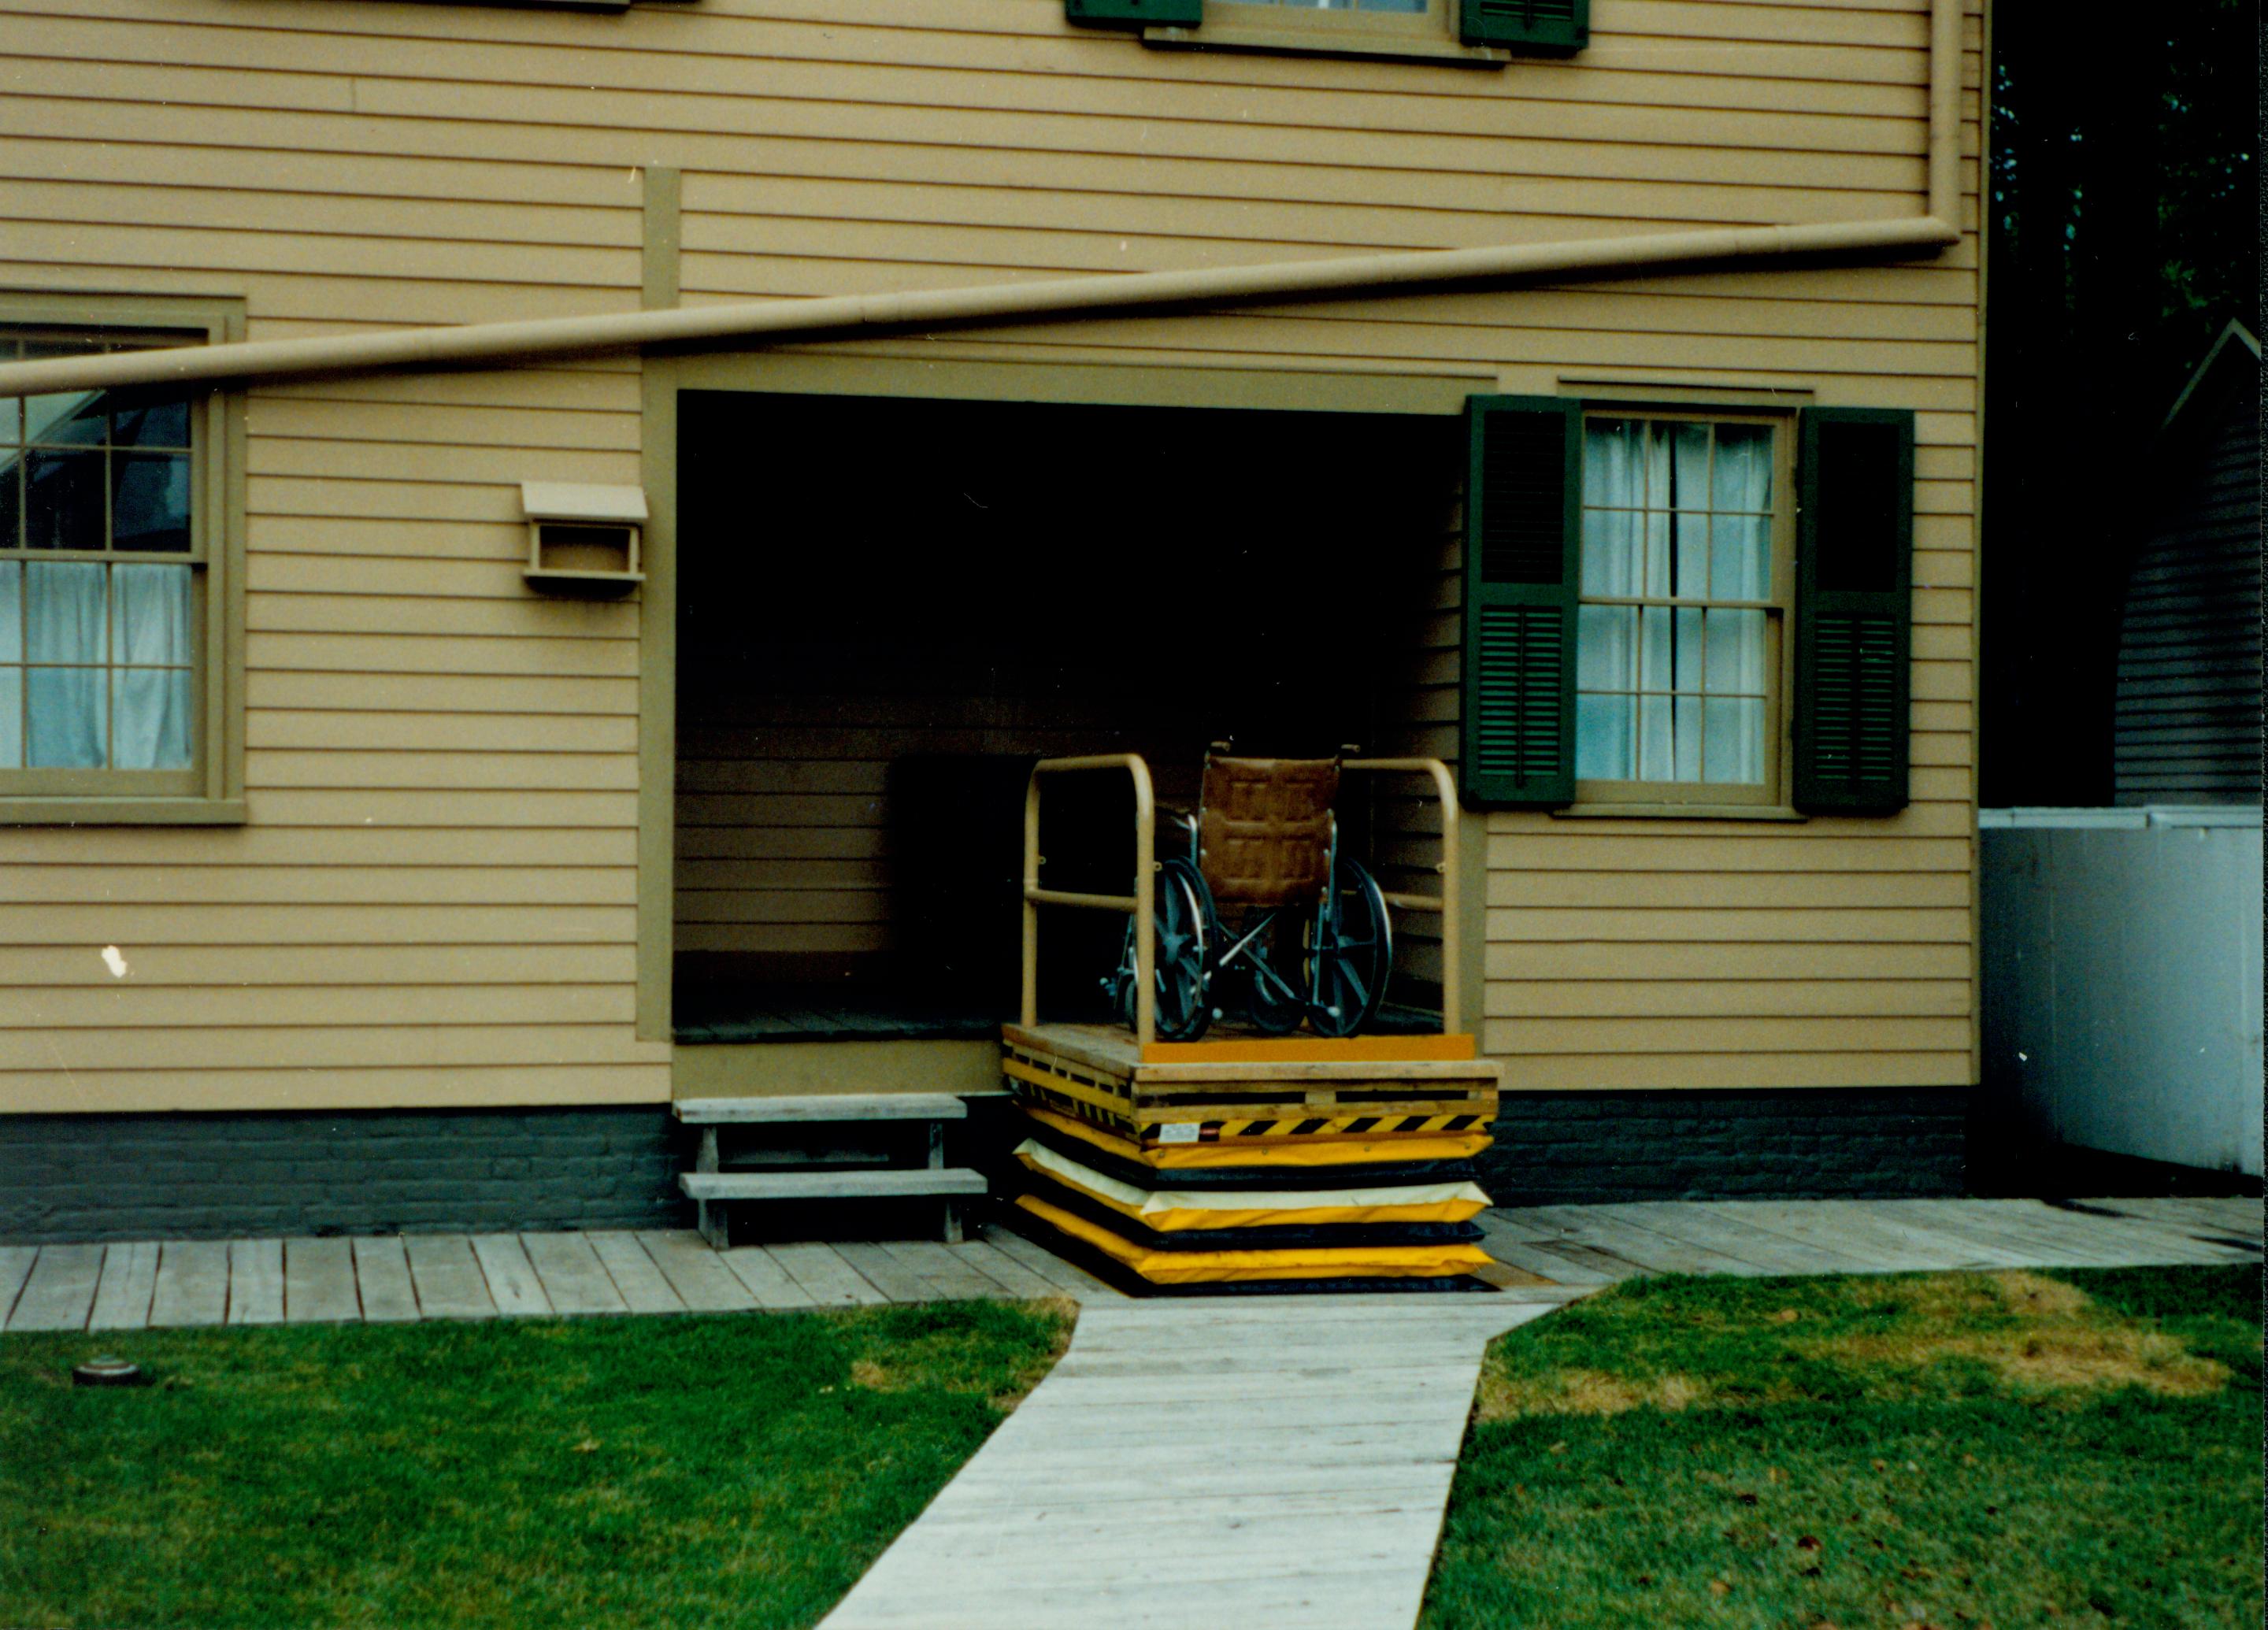 Lincoln Home wheelchair lift at full height, with empty wheelchair. Photographer facing west.